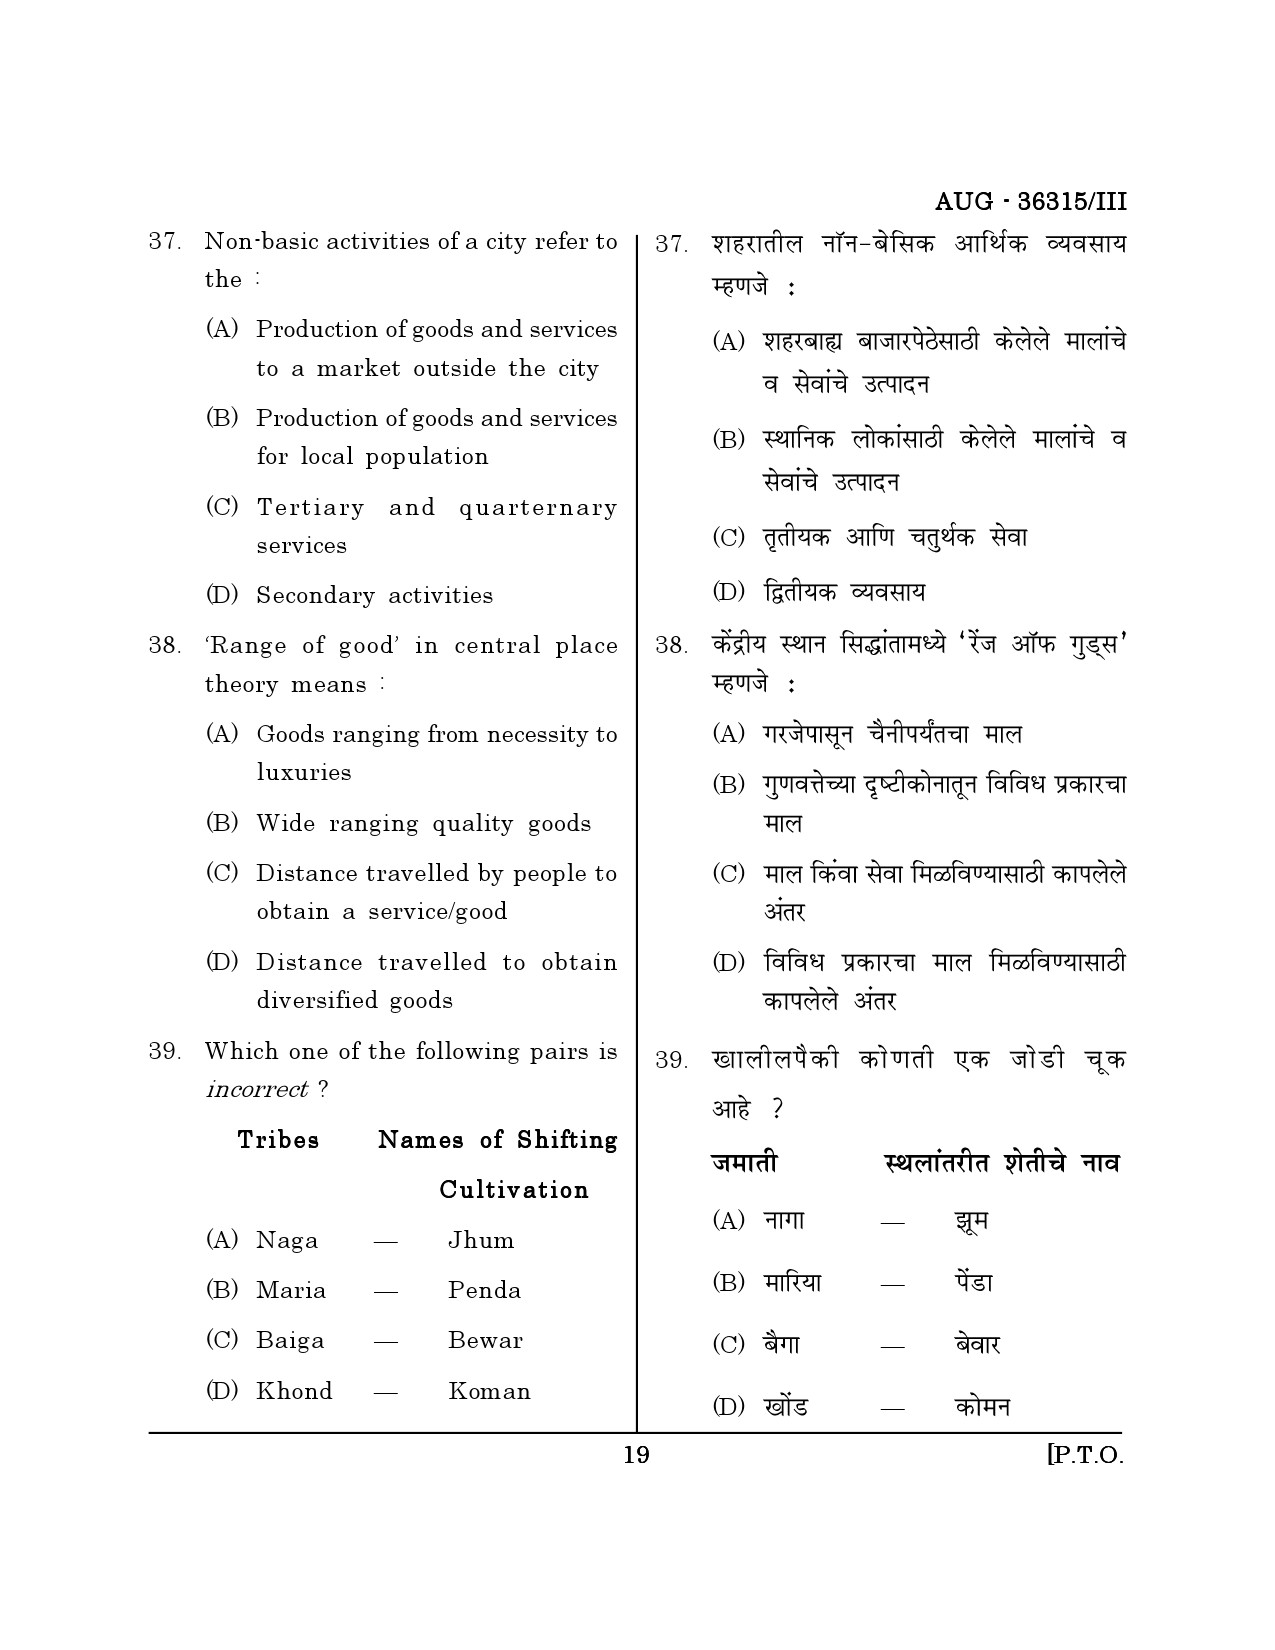 Maharashtra SET Geography Question Paper III August 2015 18